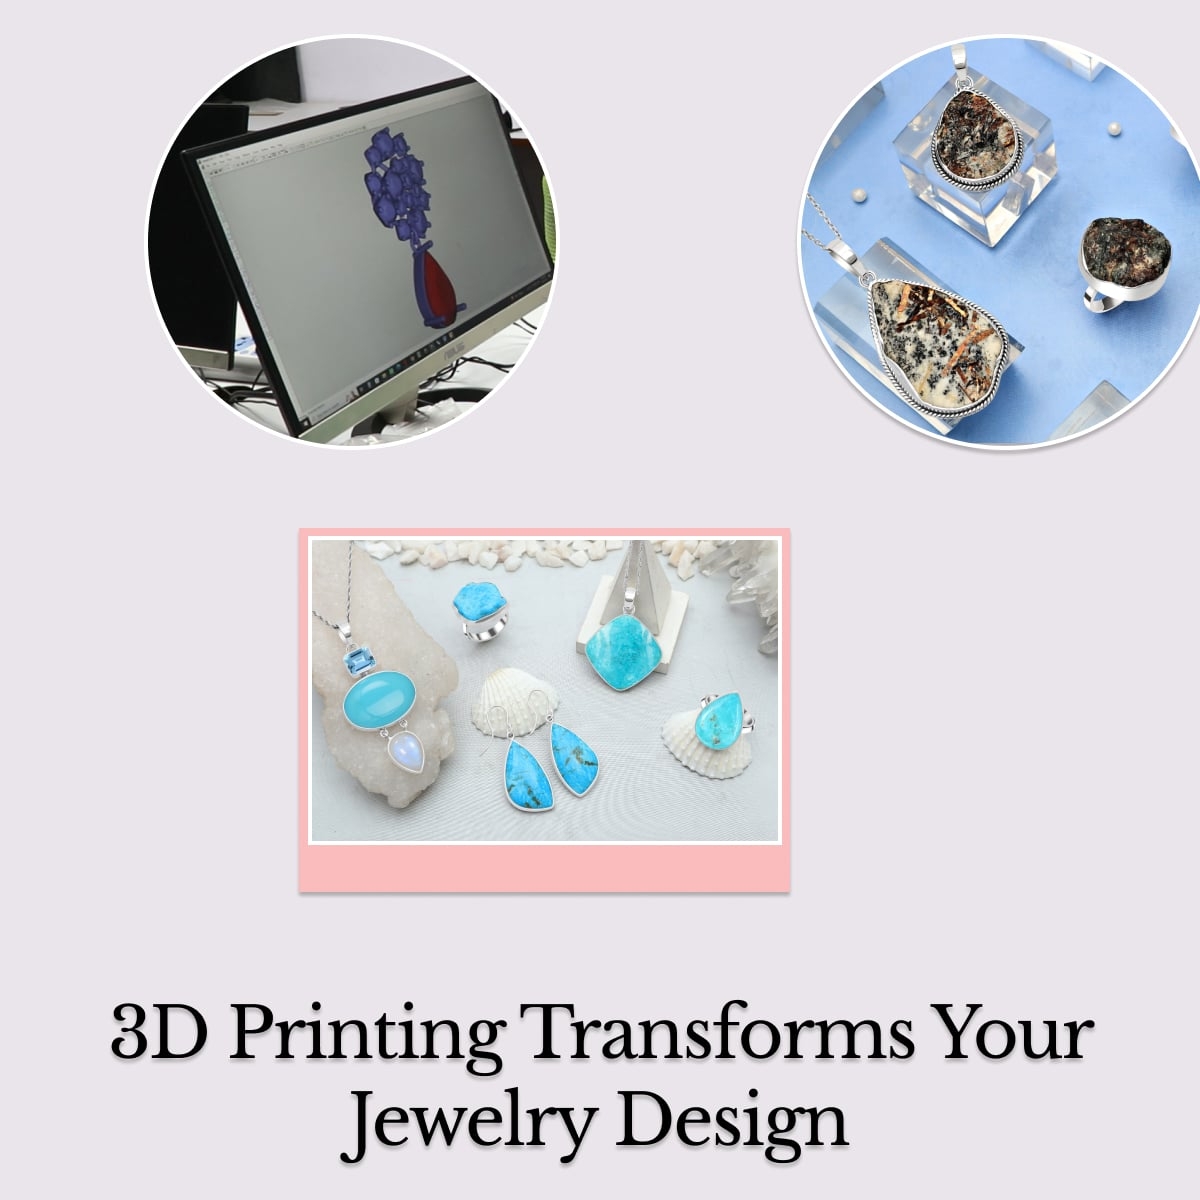 Your Jewelry Design With 3D Printing